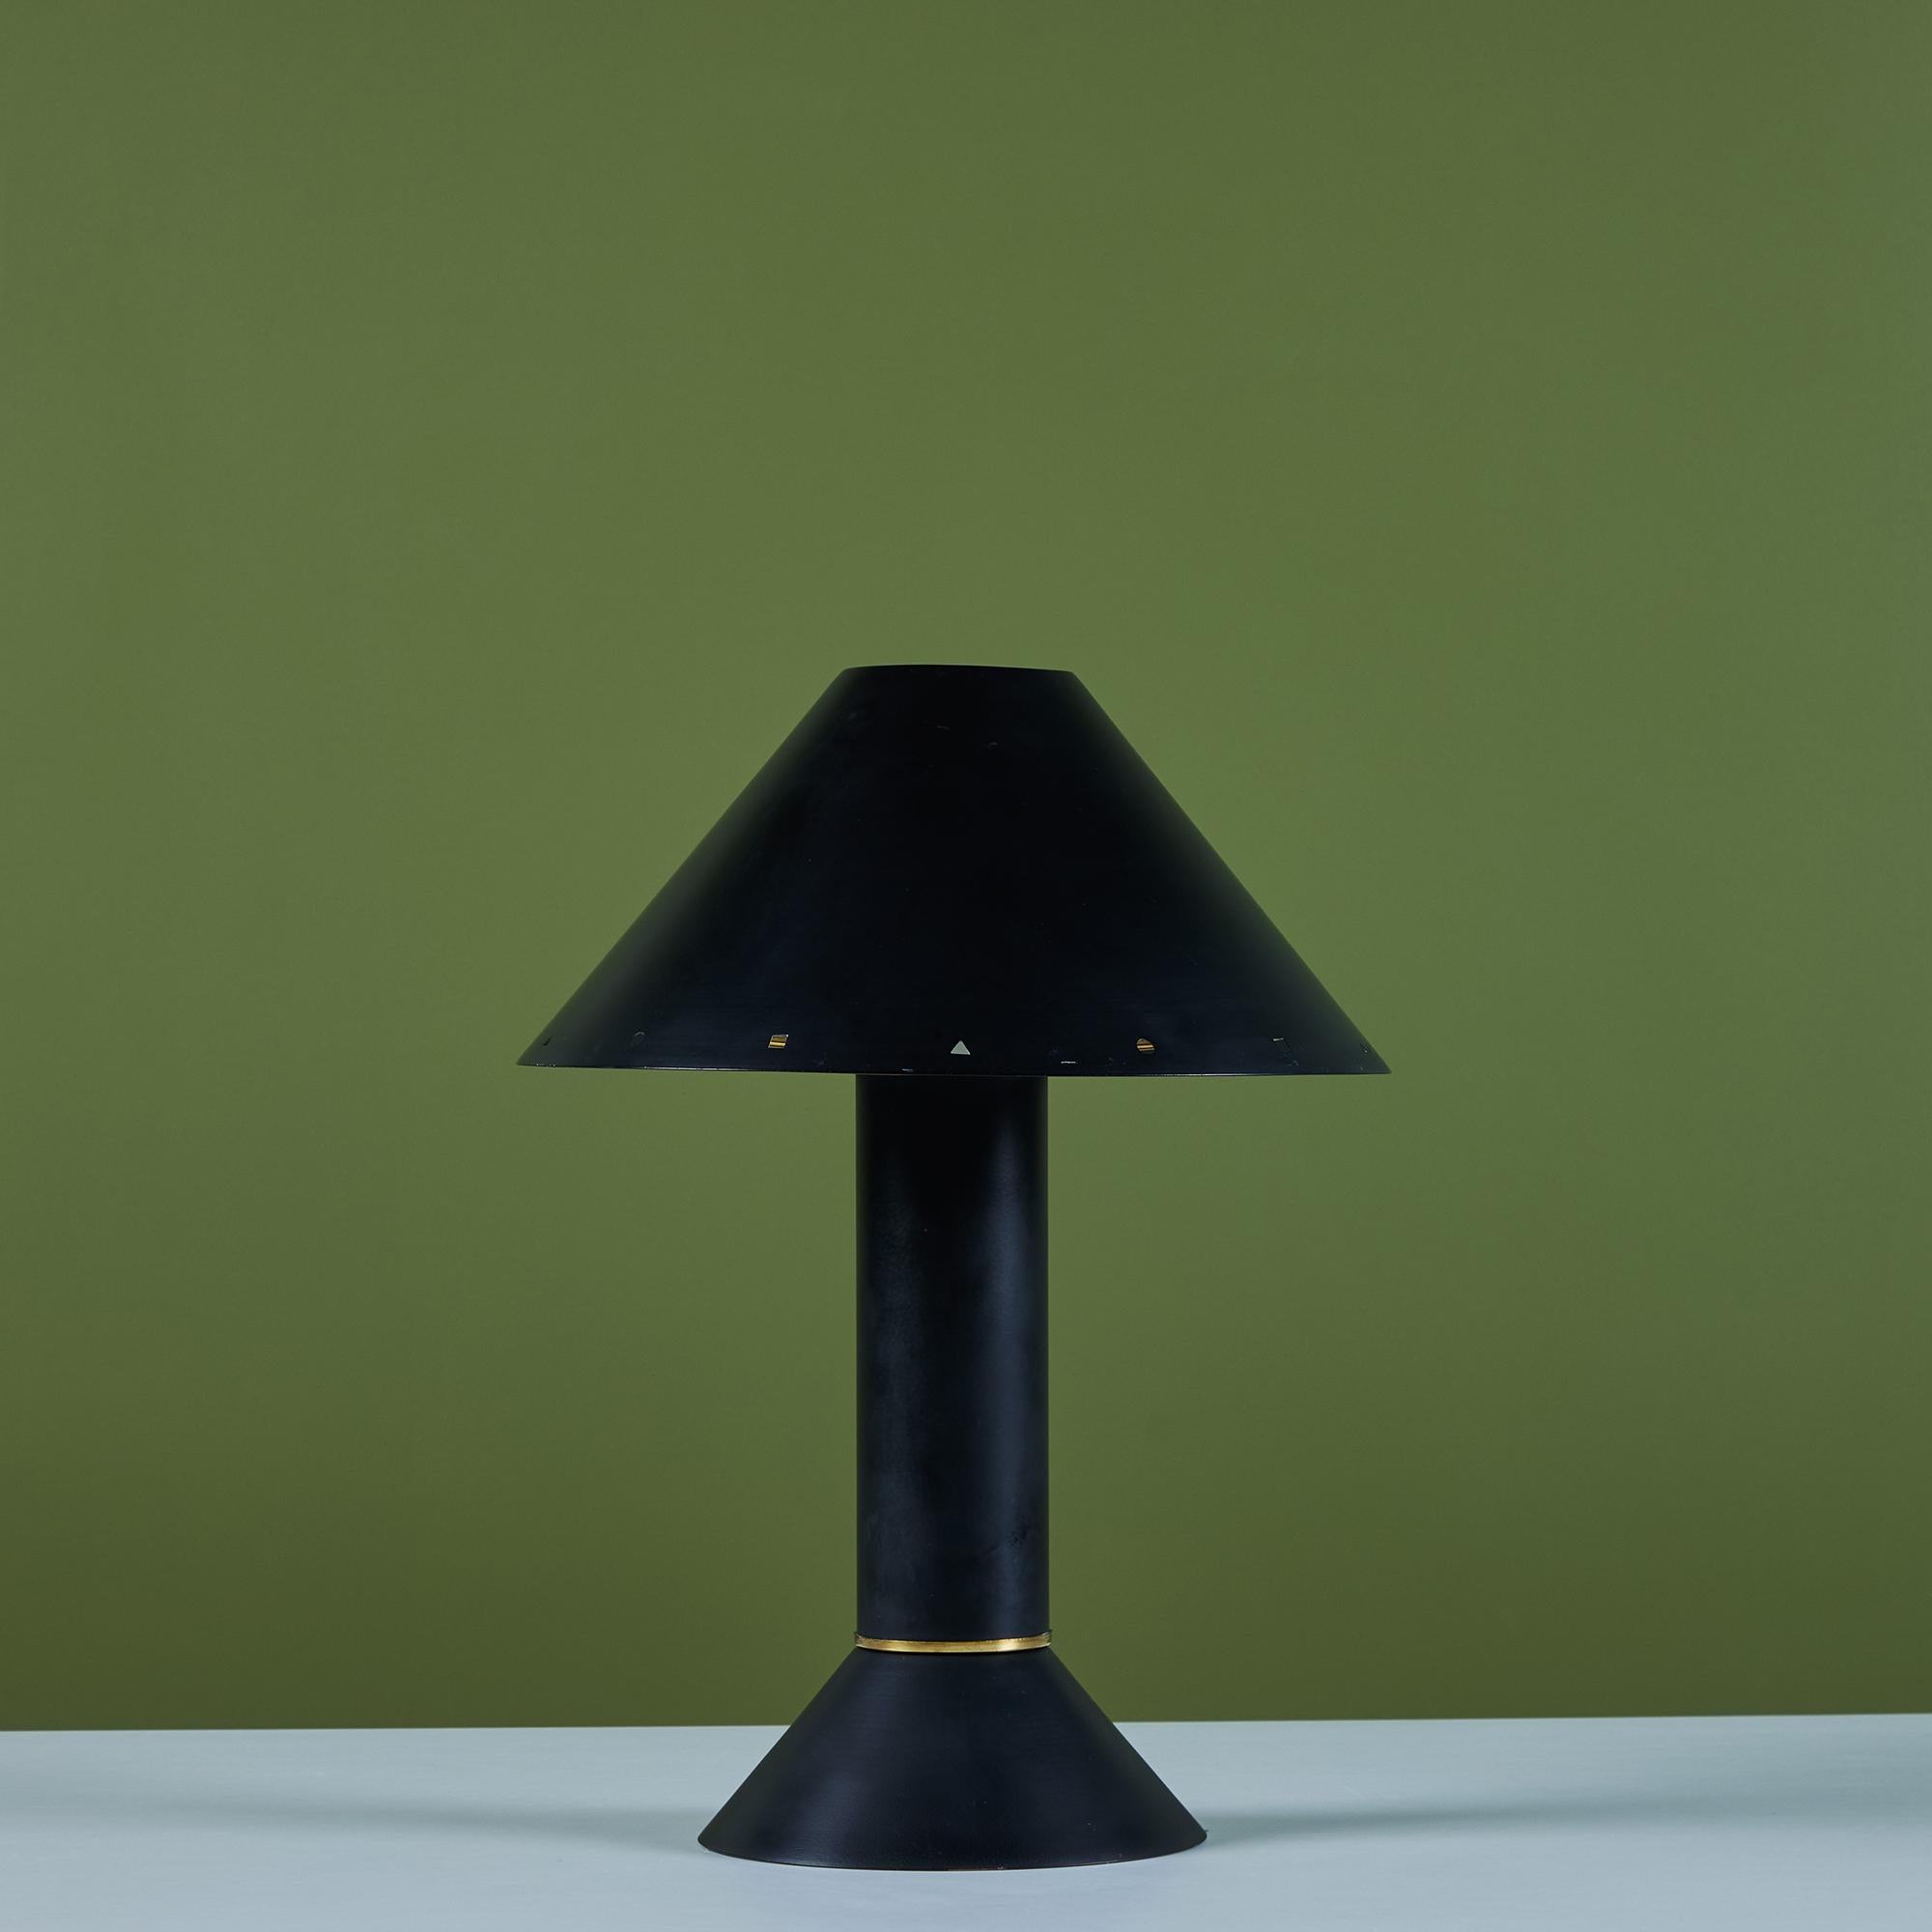 Postmodern table lamp by Los Angeles lighting designer Ron Rezek, c.1980s. The lamp features a black enameled metal frame and removable black shade with polished brass ring accent that sits at the bottom of cone shaped base. The shade features